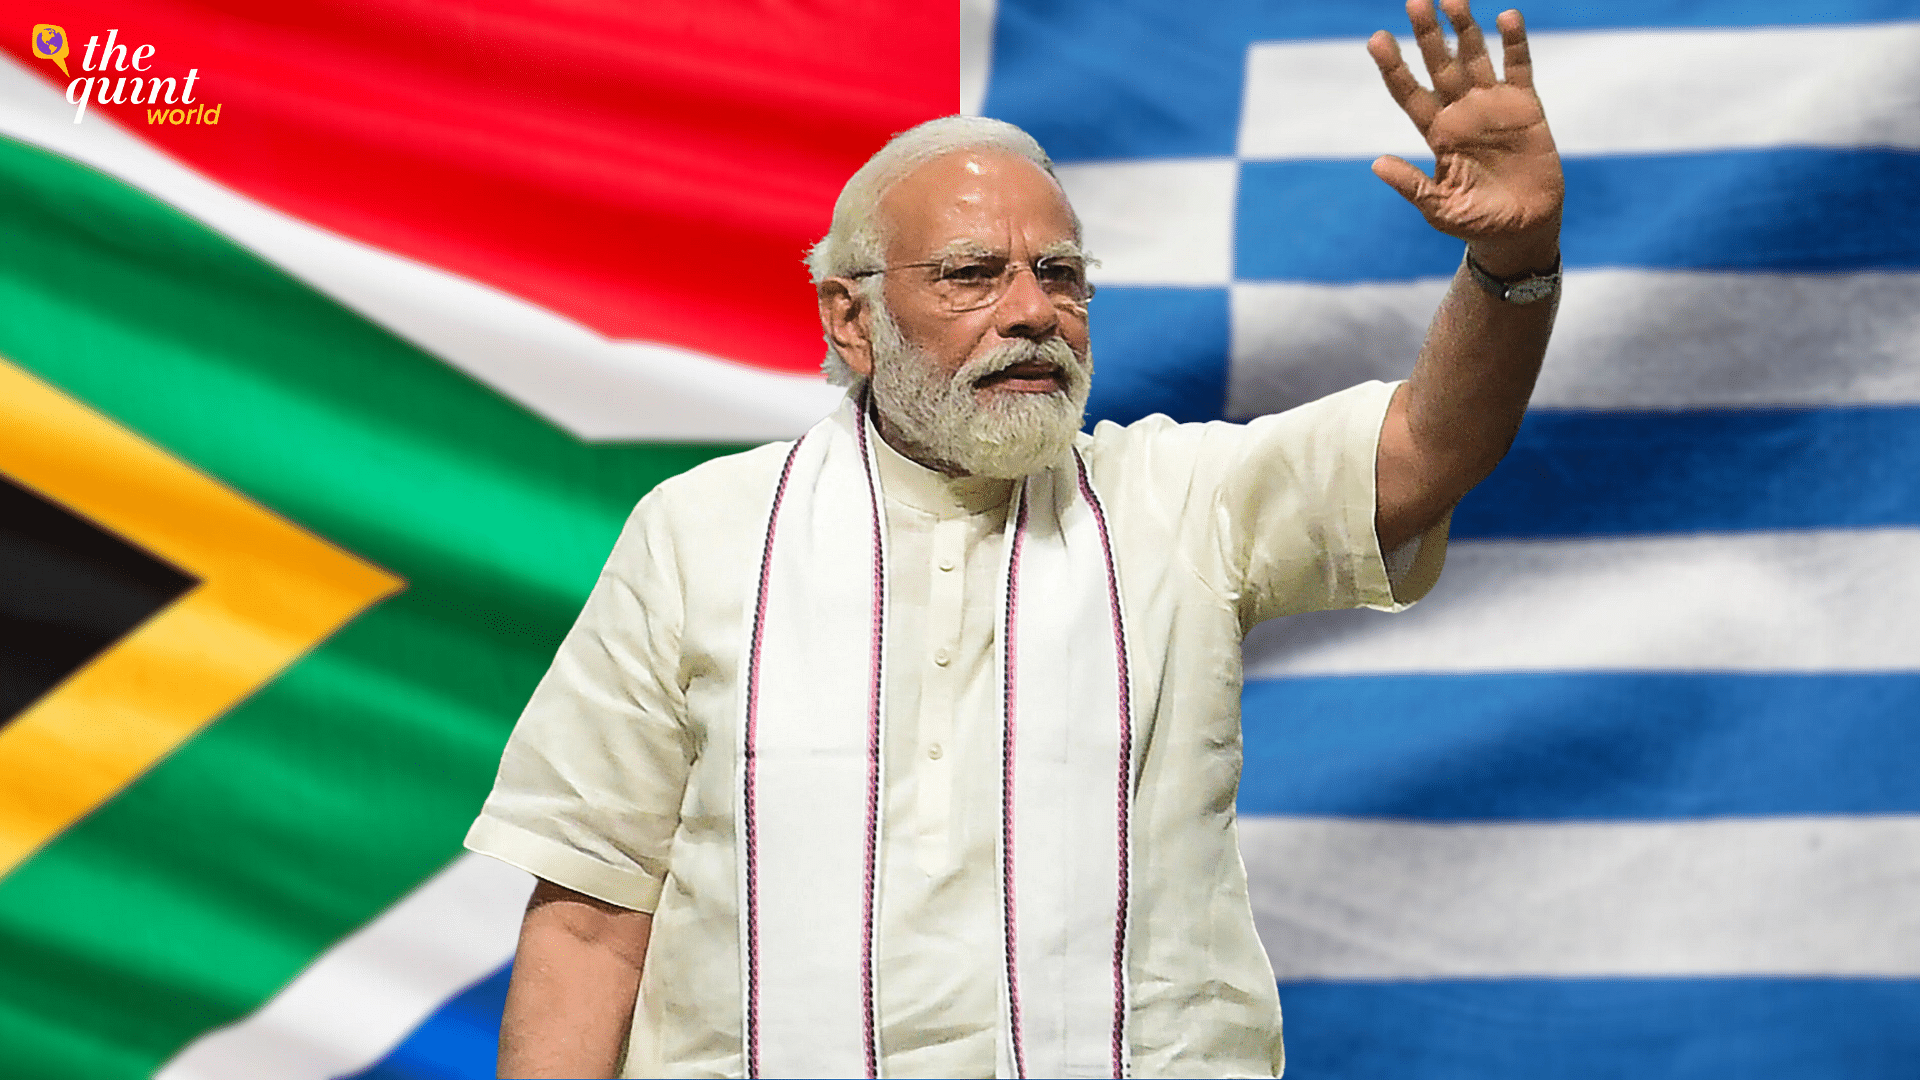 <div class="paragraphs"><p>Prime Minister Modi last visited South Africa in July 2018 for the 10th BRICS summit and previously visited in July 2016 for a bilateral visit.</p></div>